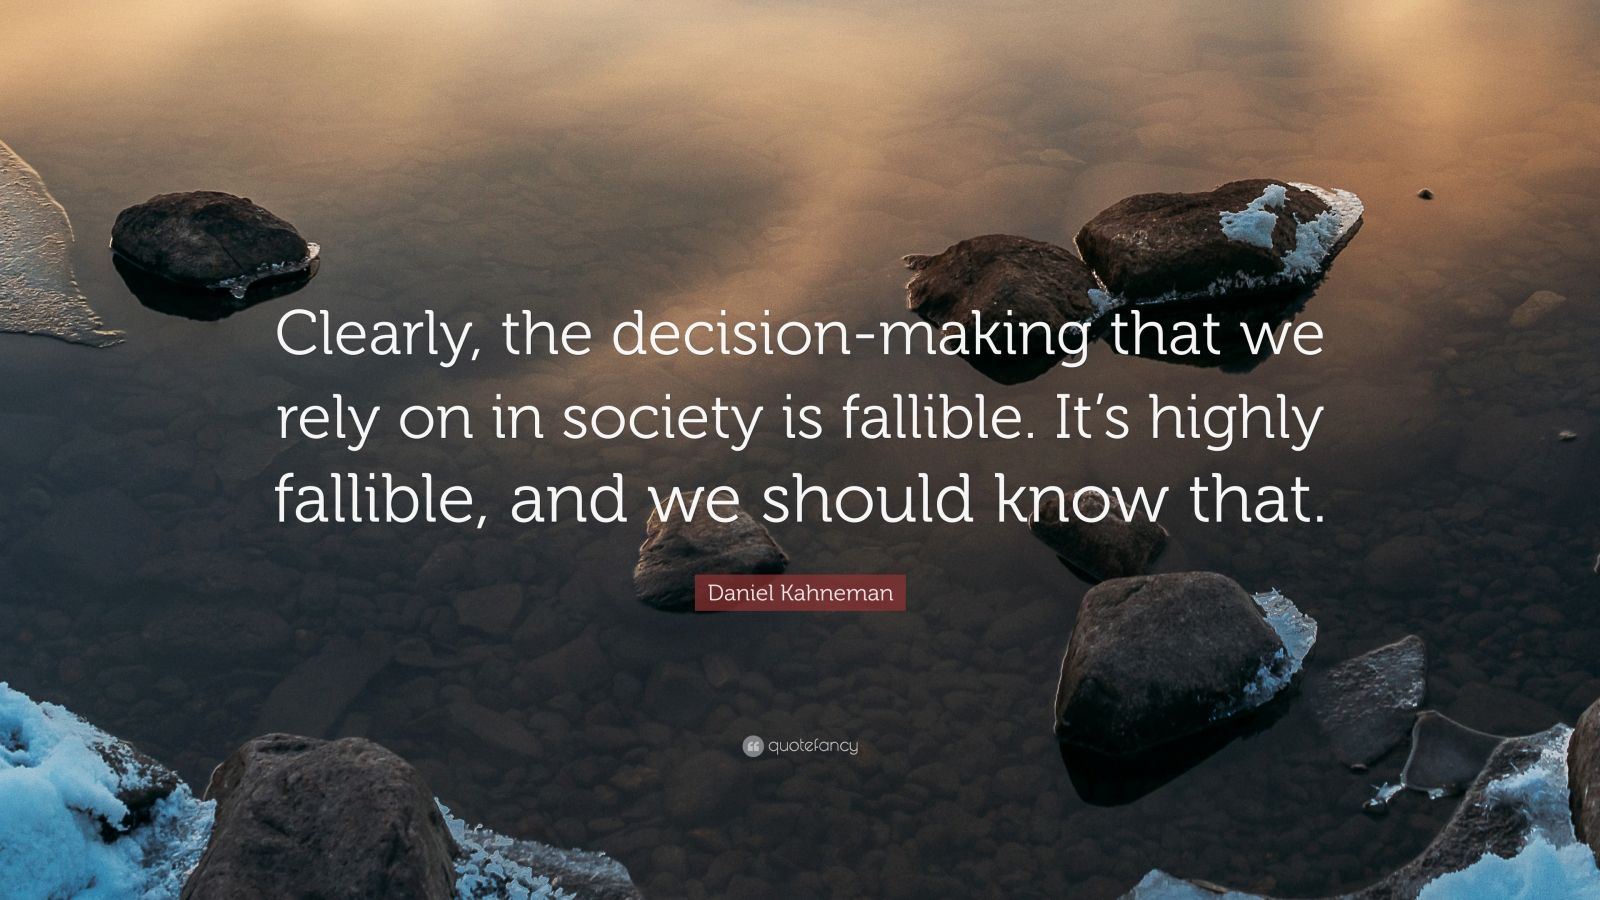 Daniel Kahneman Quote: “Clearly, the decision-making that we rely on in